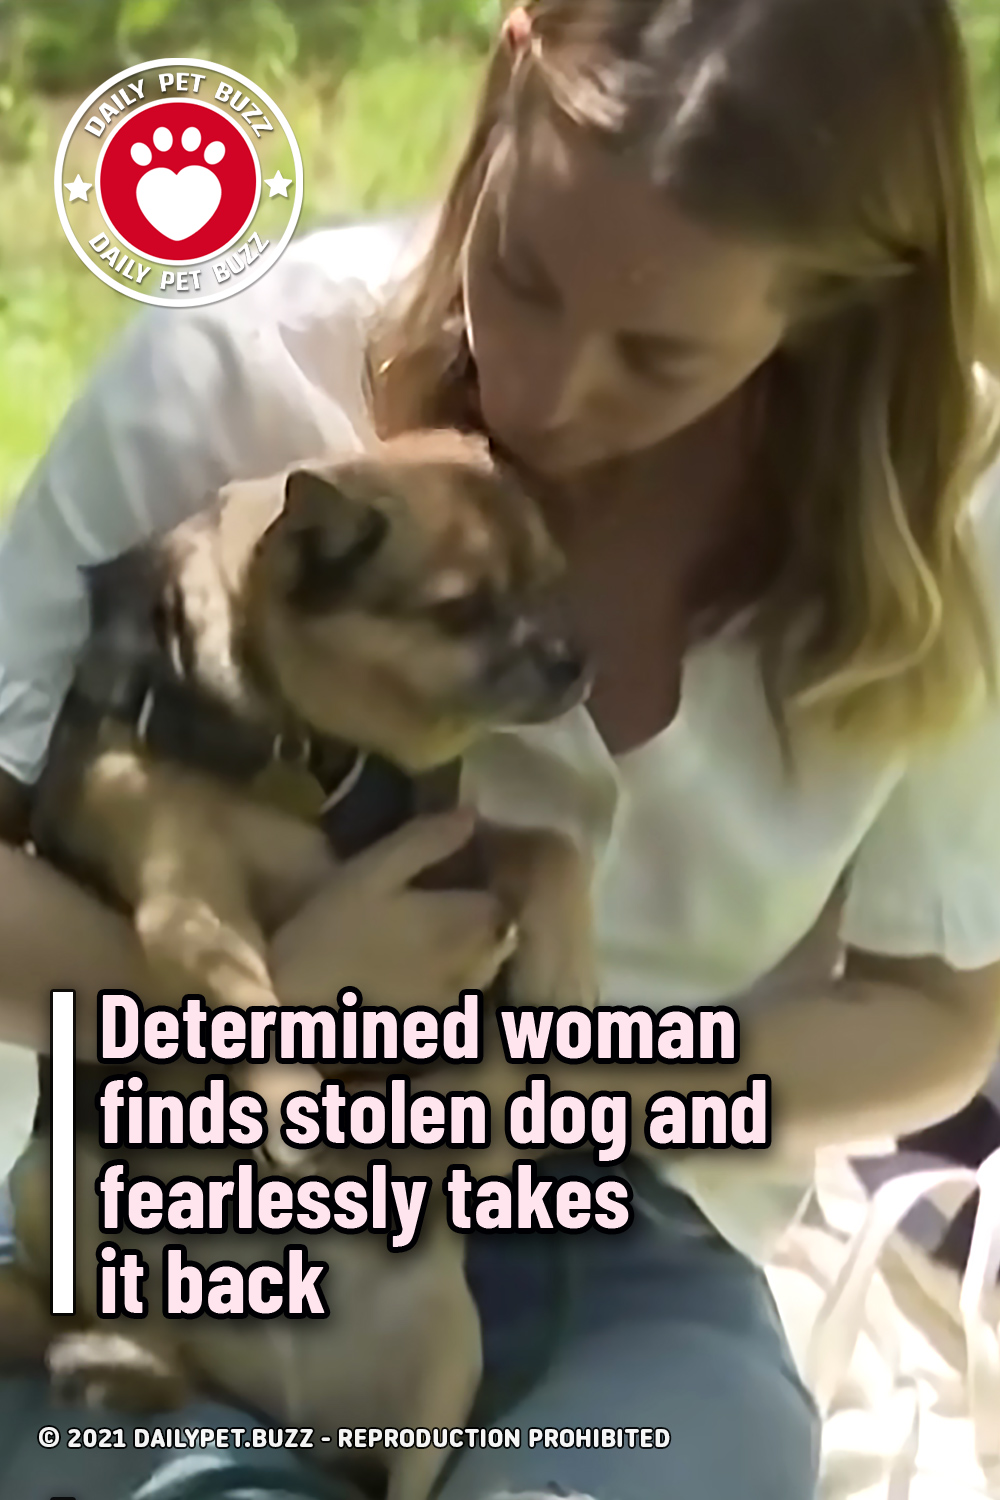 Determined woman finds stolen dog and fearlessly takes it back